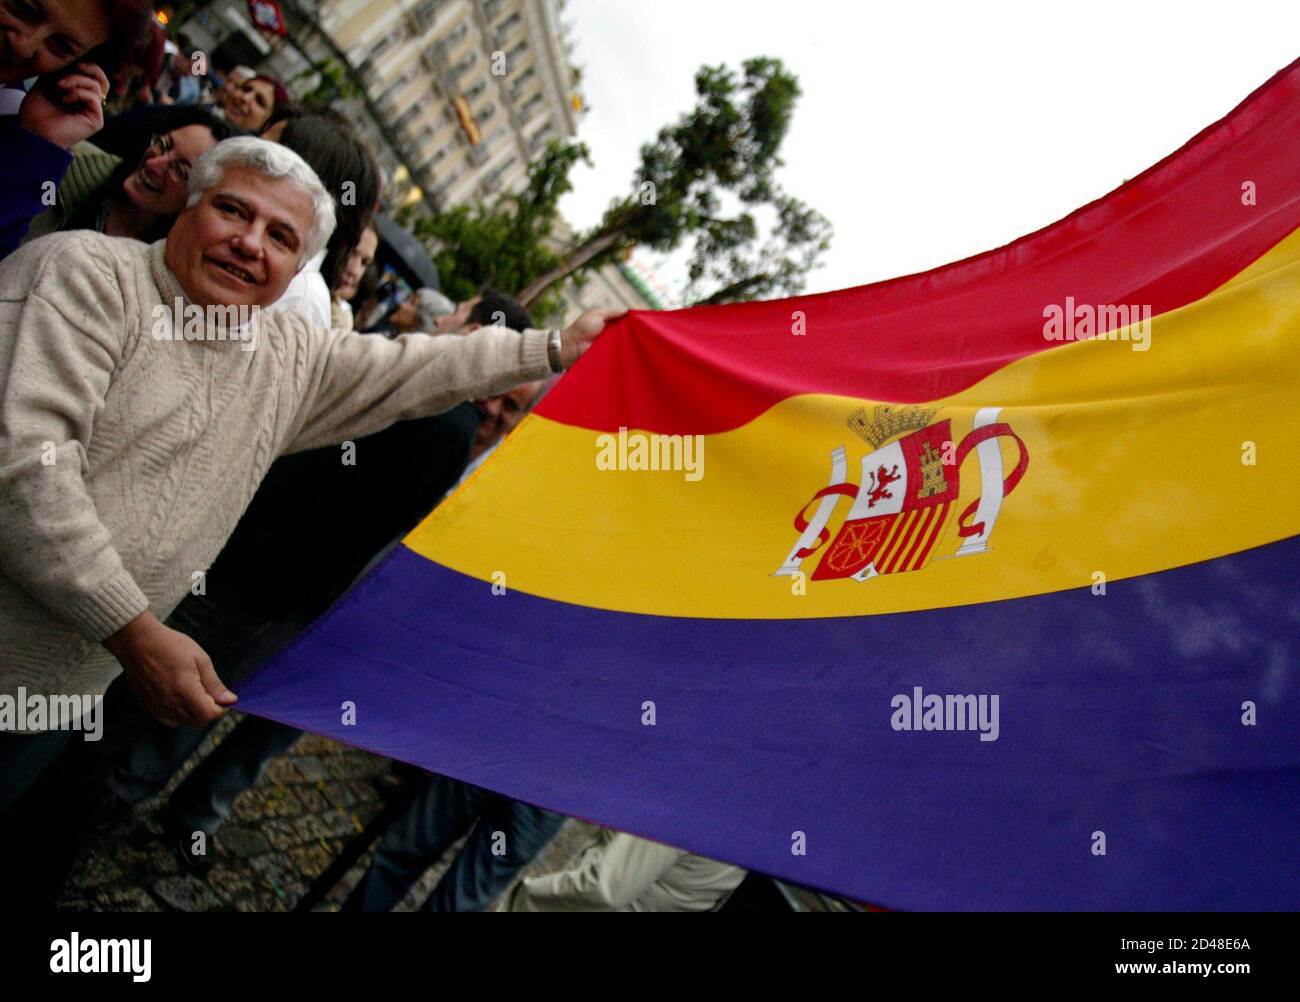 A protester shows a Spanish Republican flag during a demonstration by more than 500 anti-monarchists in Madrid, May 21, 2003, on the eve of the wedding of Crown Prince Felipe to divorced journalist Letizia Ortiz. Police blocked the demonstrators' access to Madrid's historic Puerta del Sol square as they waved Republican flags and chanted 'Spain, tomorrow will be Republican!' REUTERS/Miguel Vidal  SP/DL Stock Photo